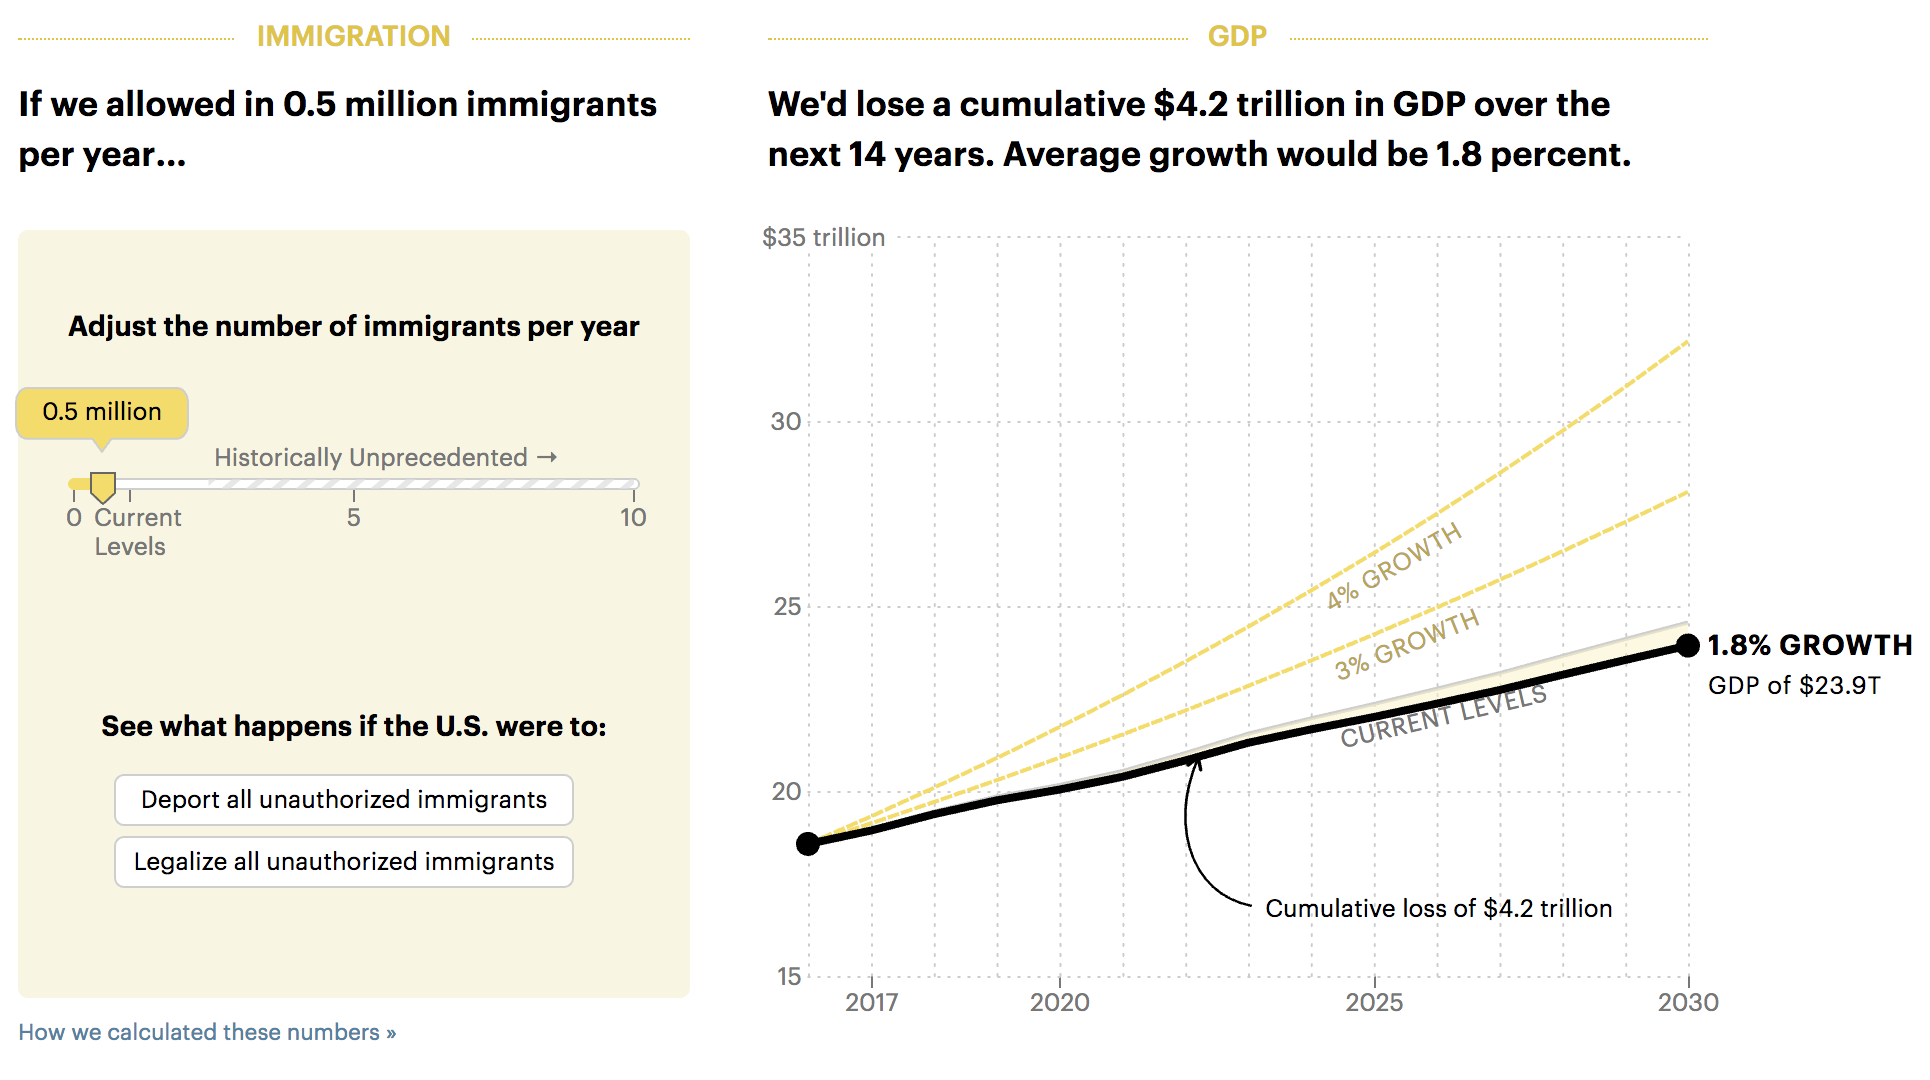 Reducing immigration takes GDP growth further away from the 4% target